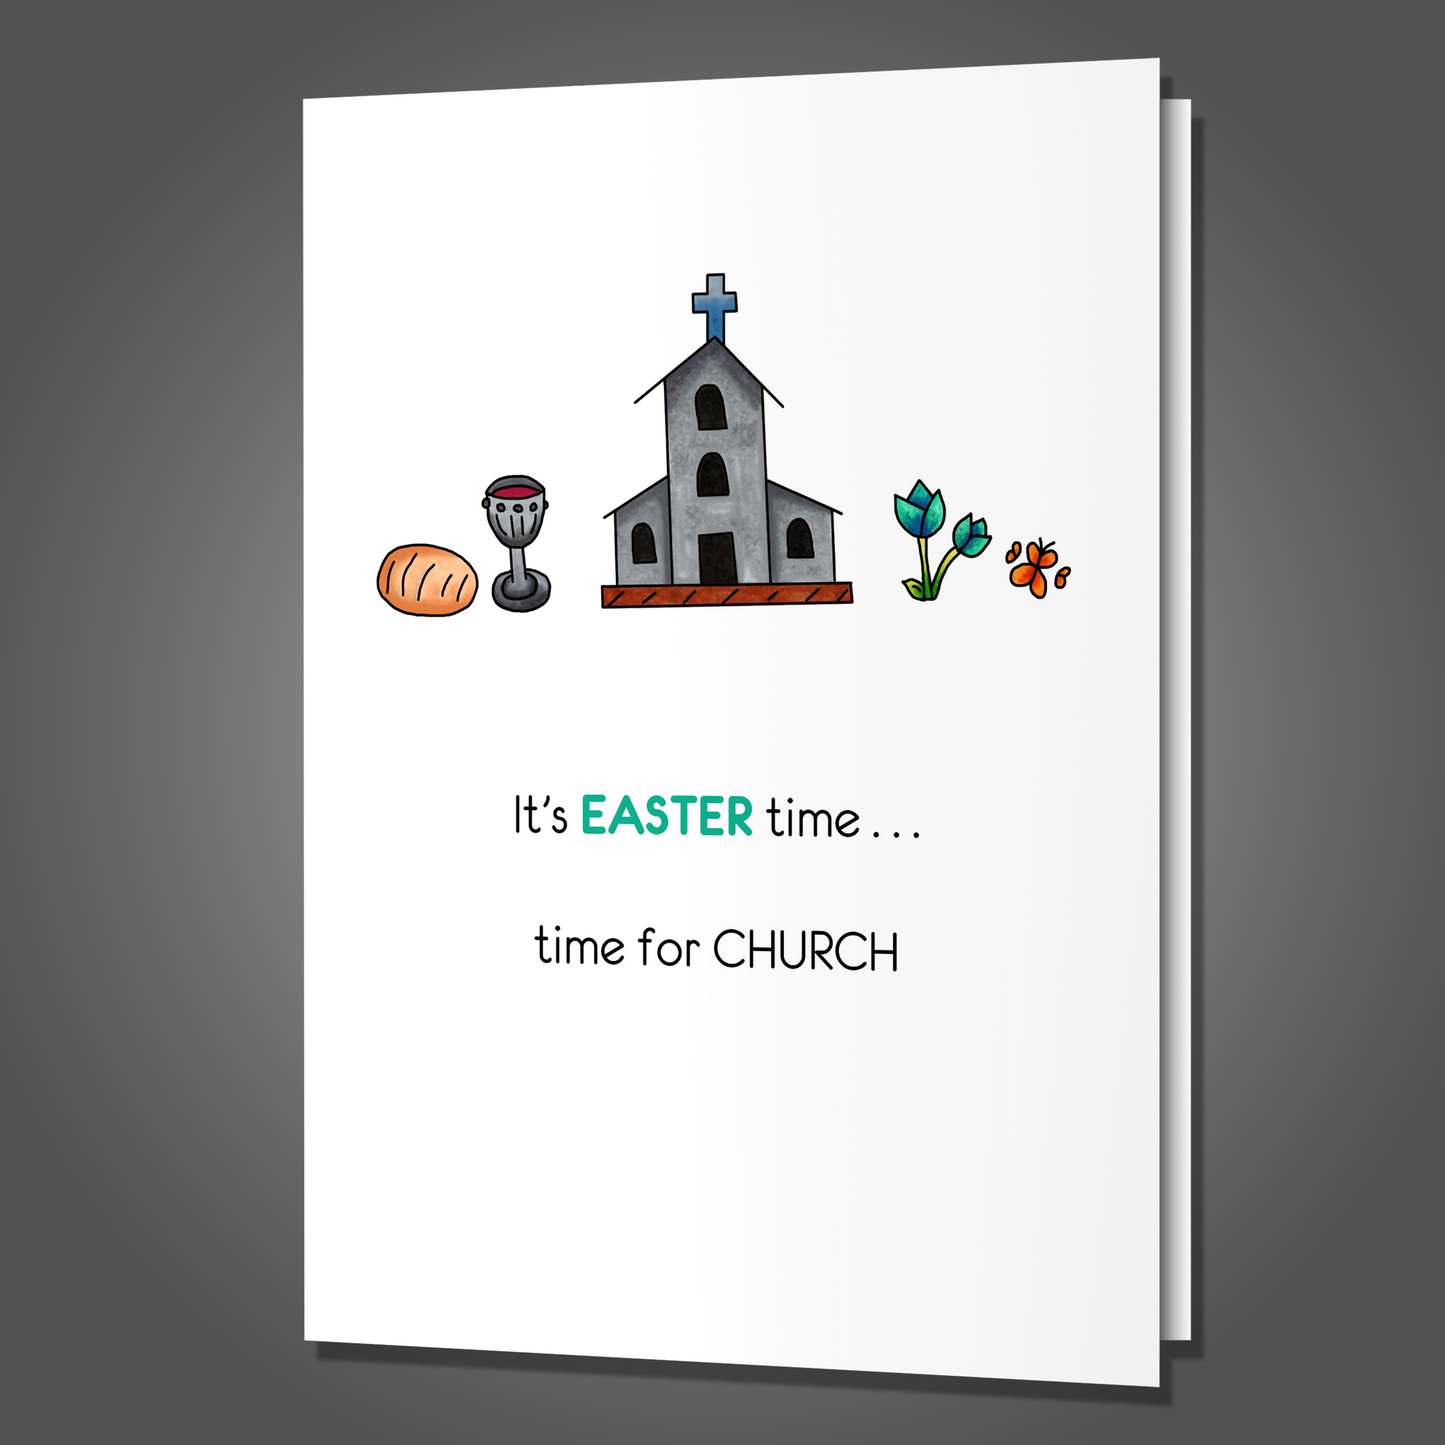 Keeping You Out of Hell, Easter Card